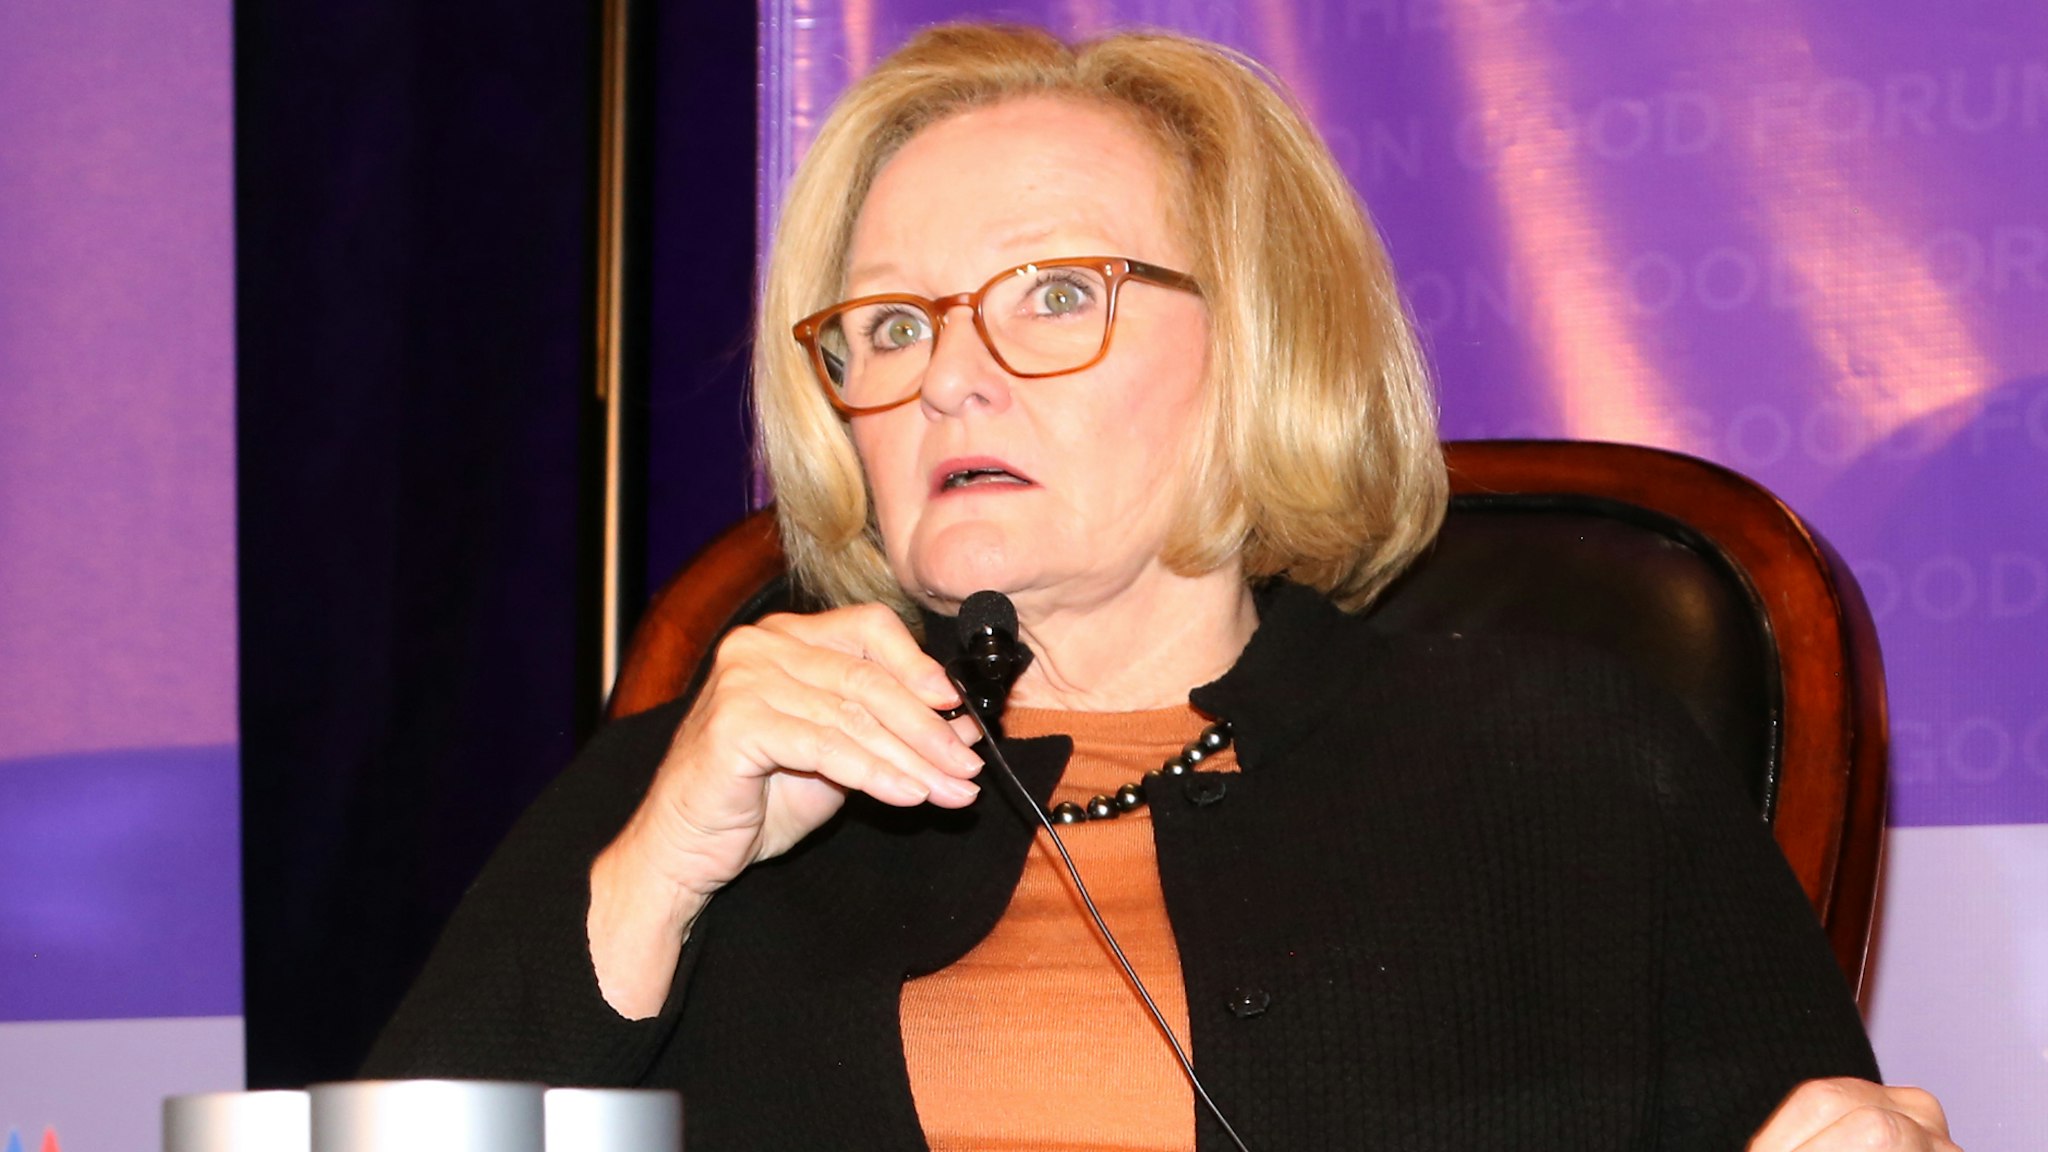 Errol Louis and Claire McCaskill speak onstage at The Common Good Forum &amp; American Spirit Awards 2019 at The Roosevelt Hotel on May 10, 2019 in New York City.